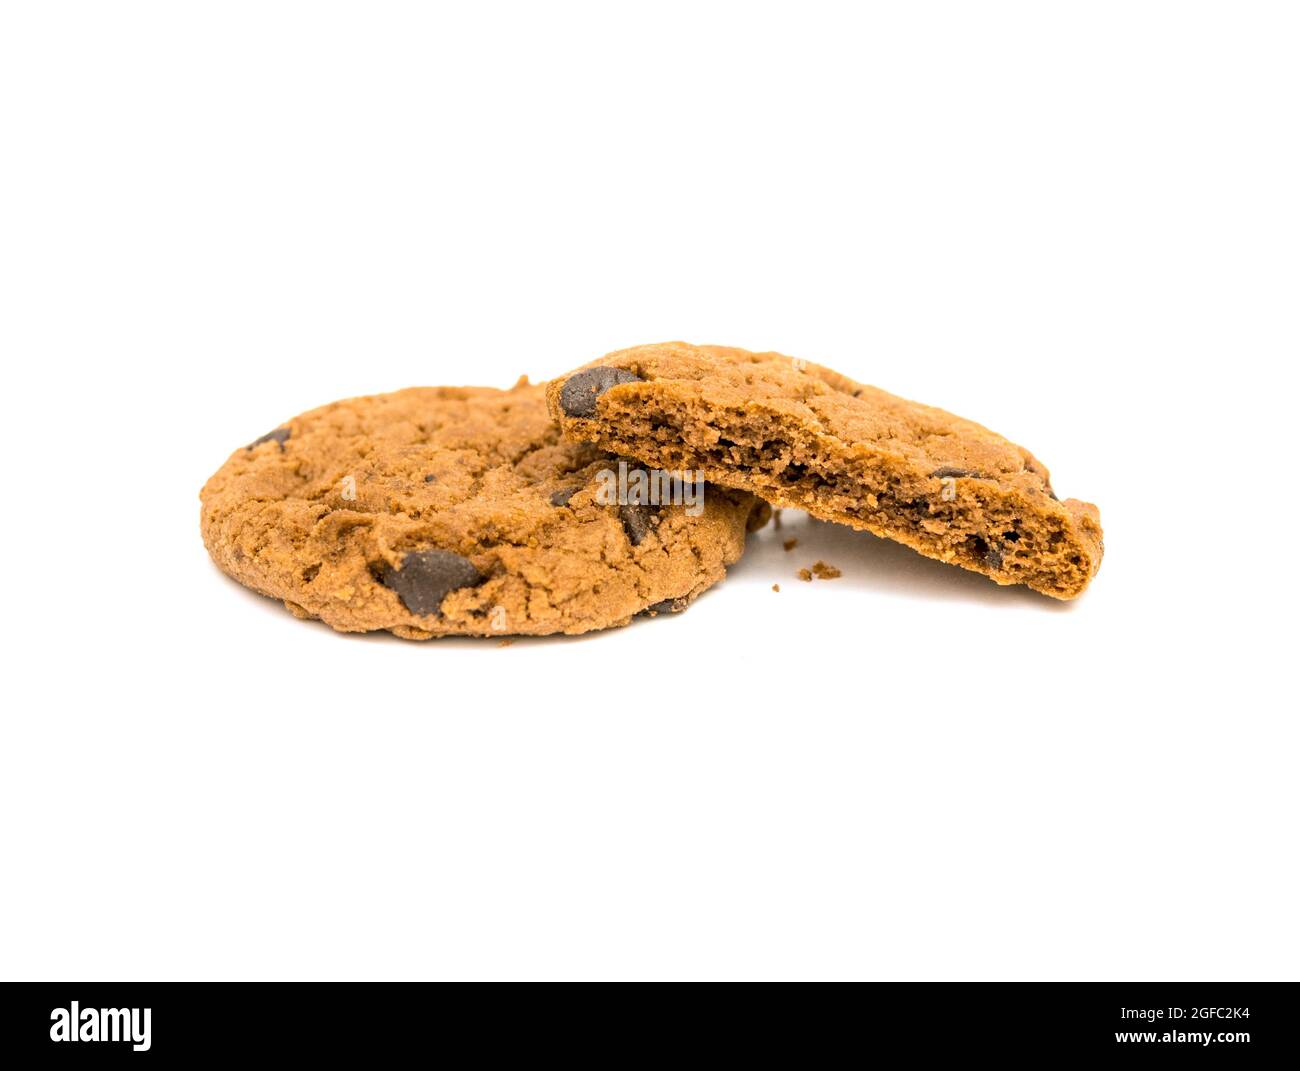 Chocolate chip cookies and crumb isolated on white background. Stock Photo